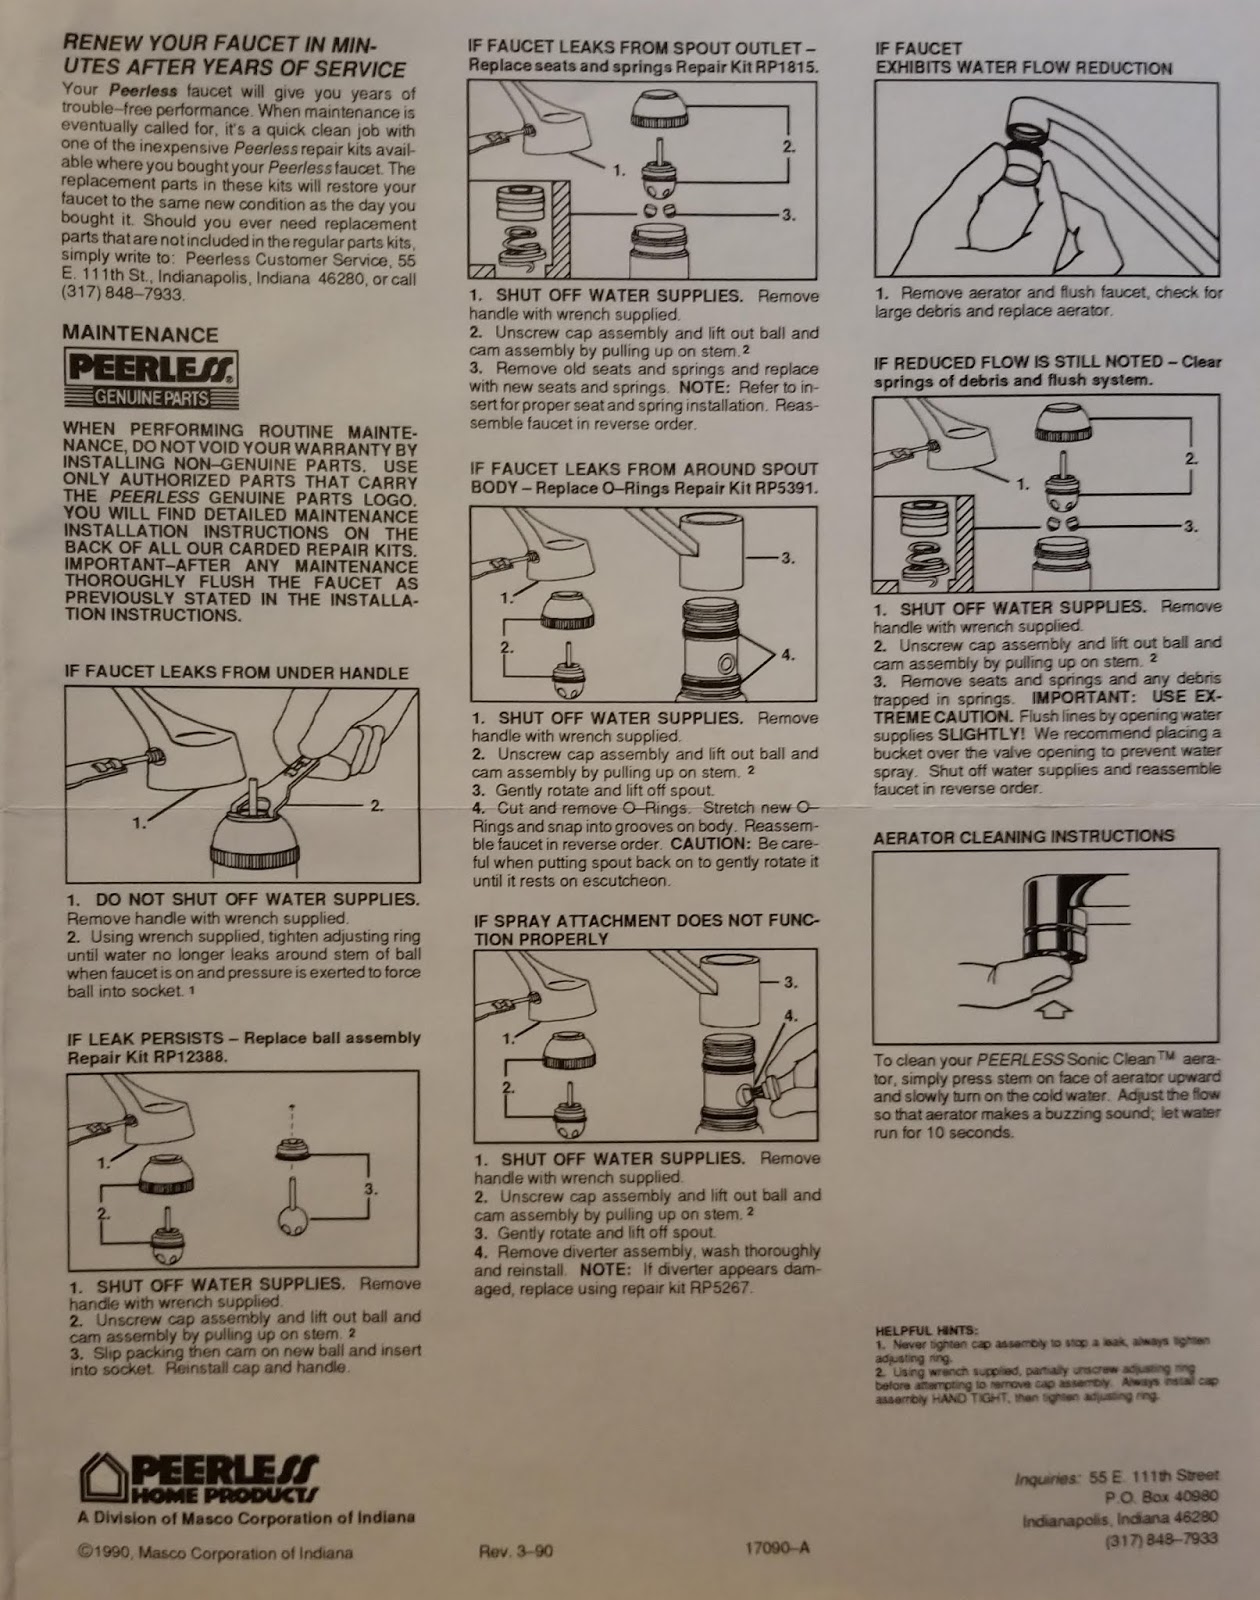 Find Your Manuals Here Peerless Faucet Installation Instructions